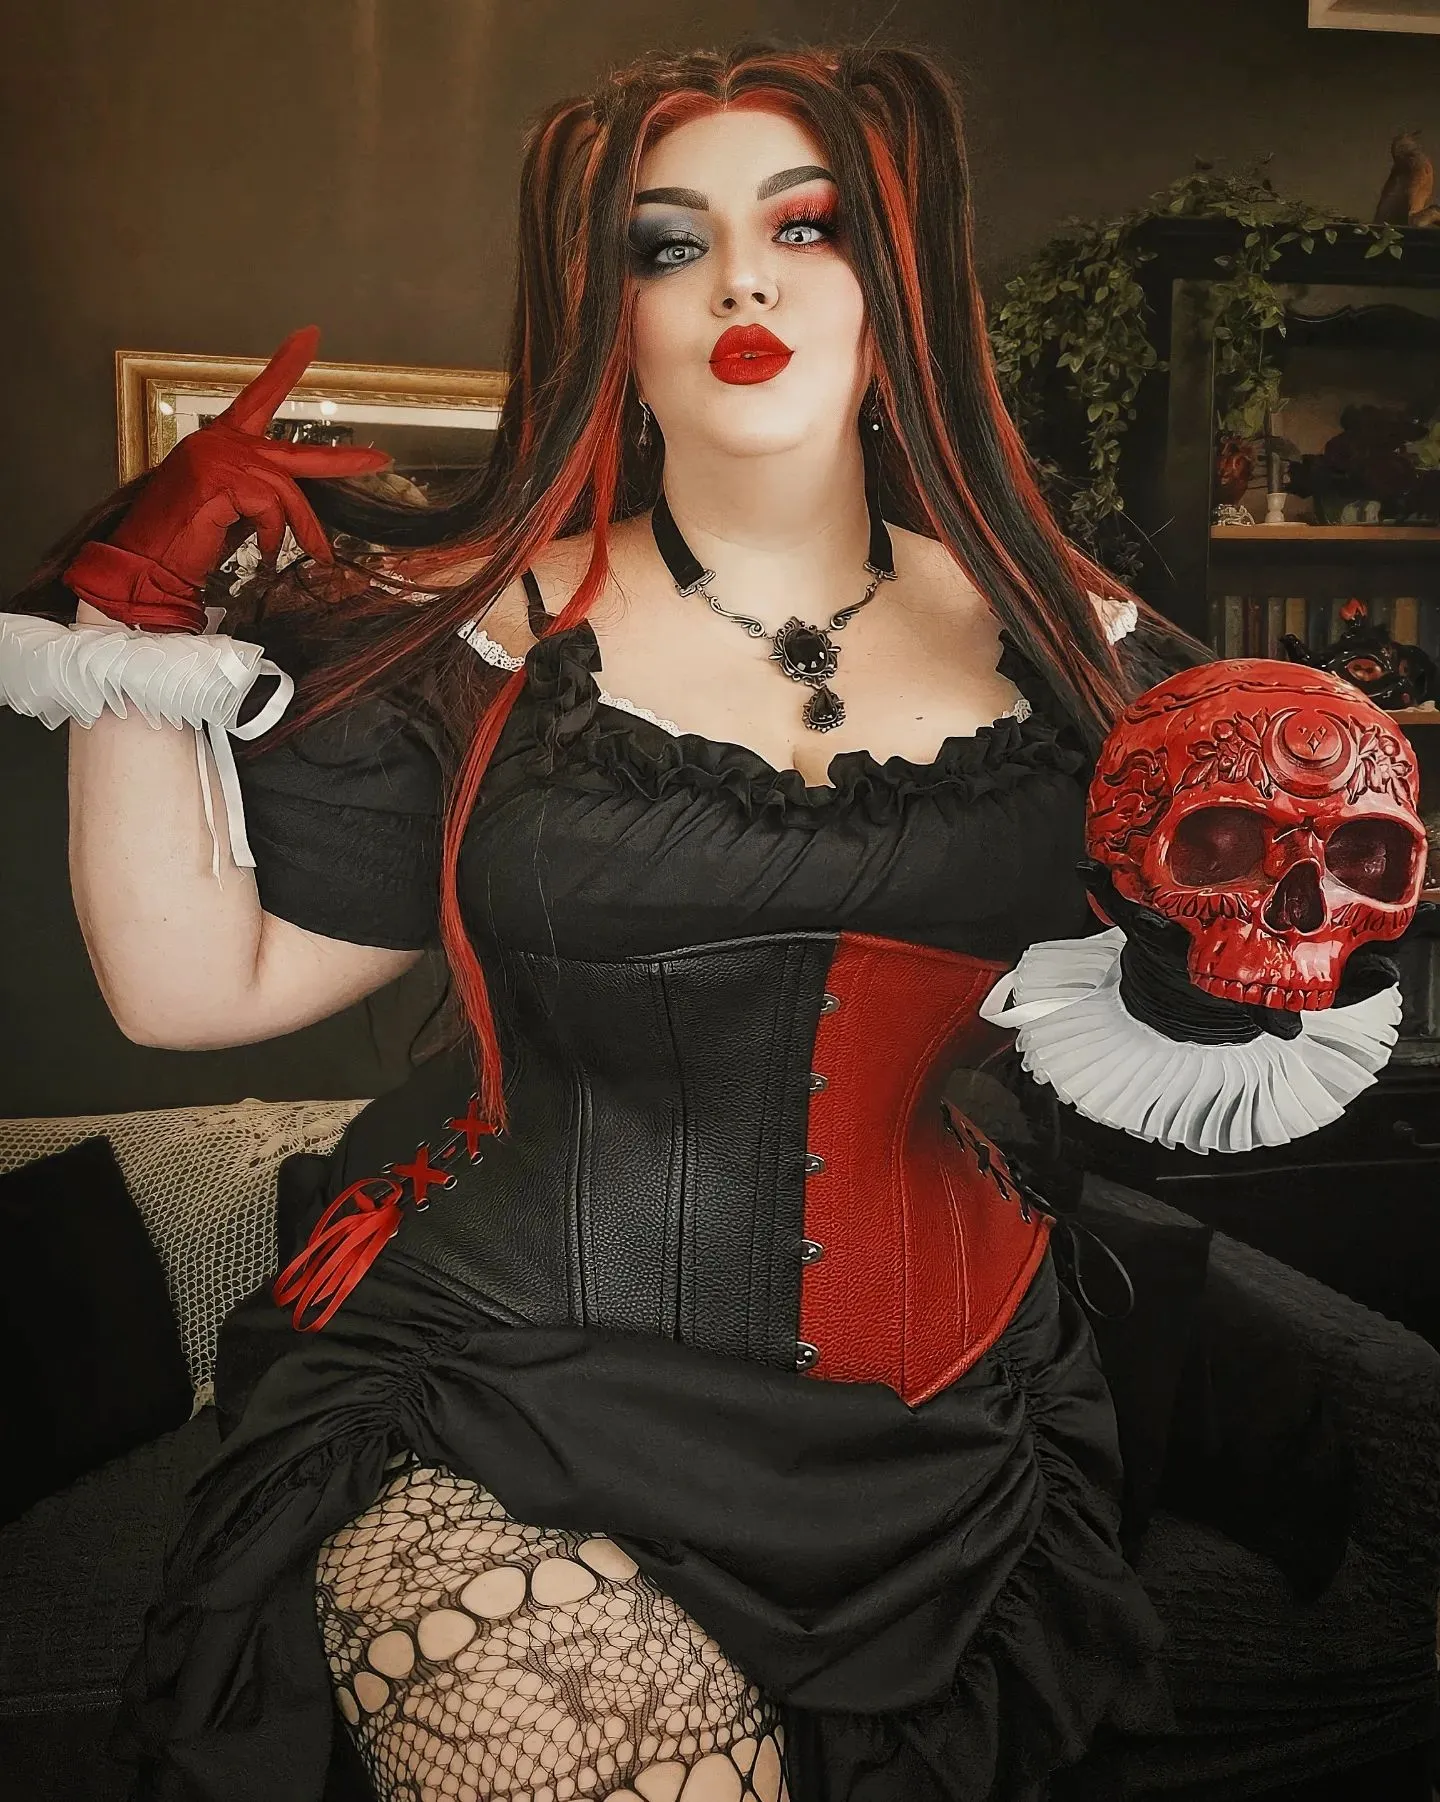 DIY Harley Quinn costume with a black corset